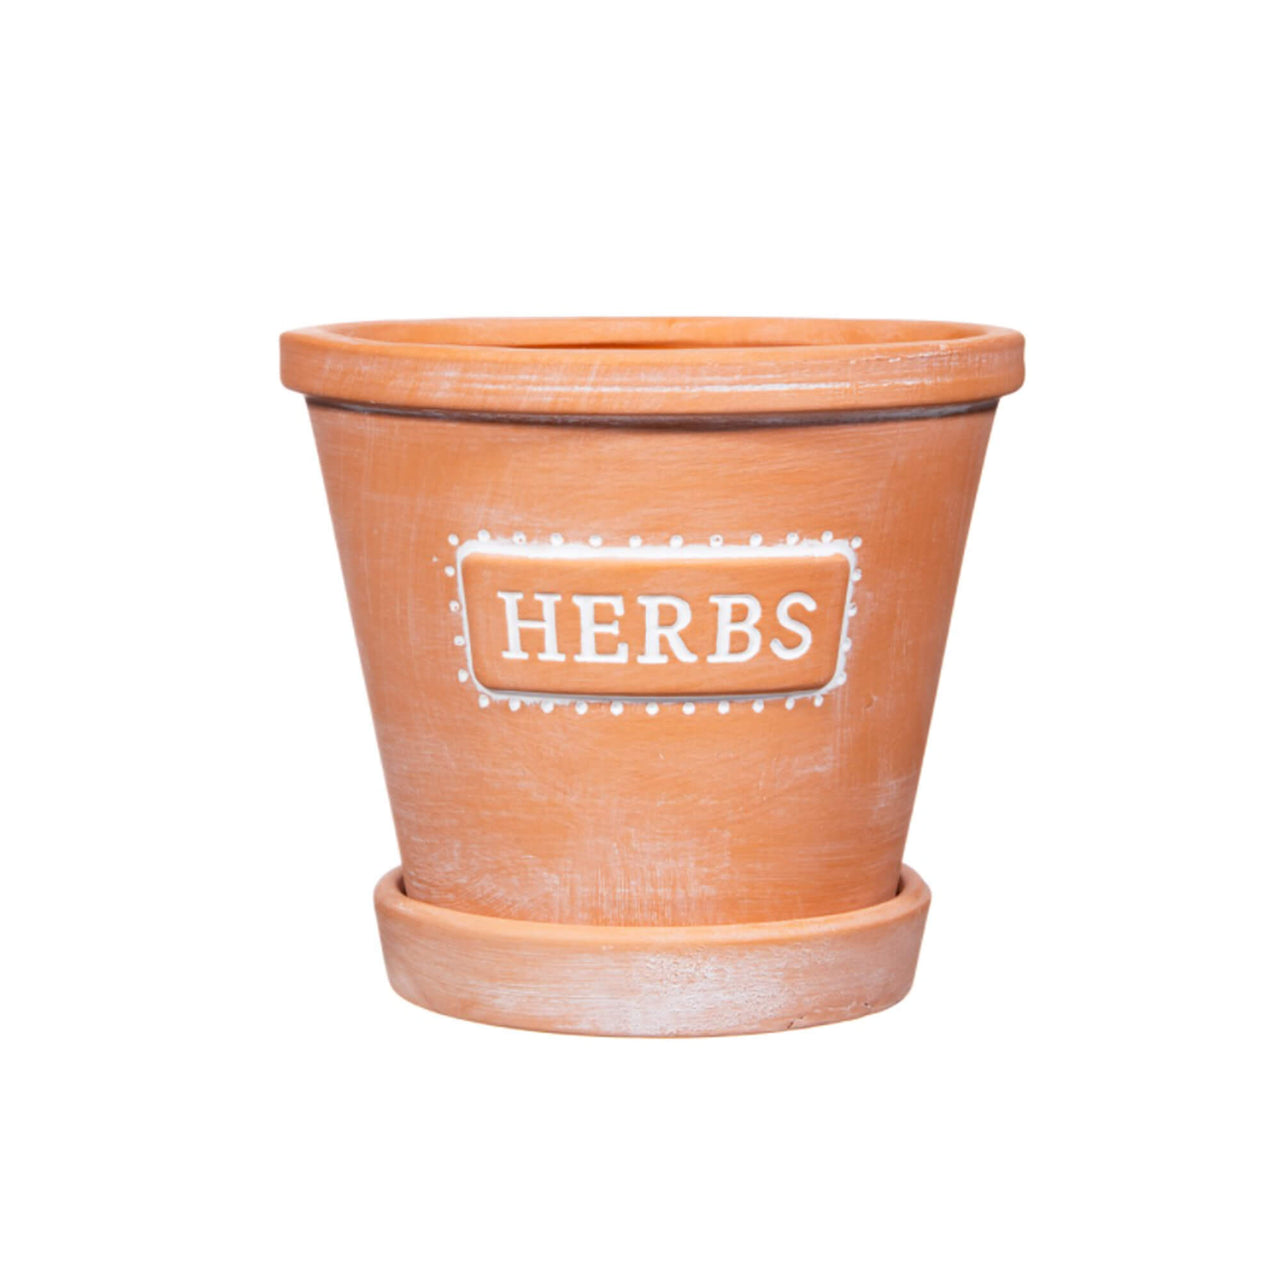 Herbs Terracotta Planter with Saucer